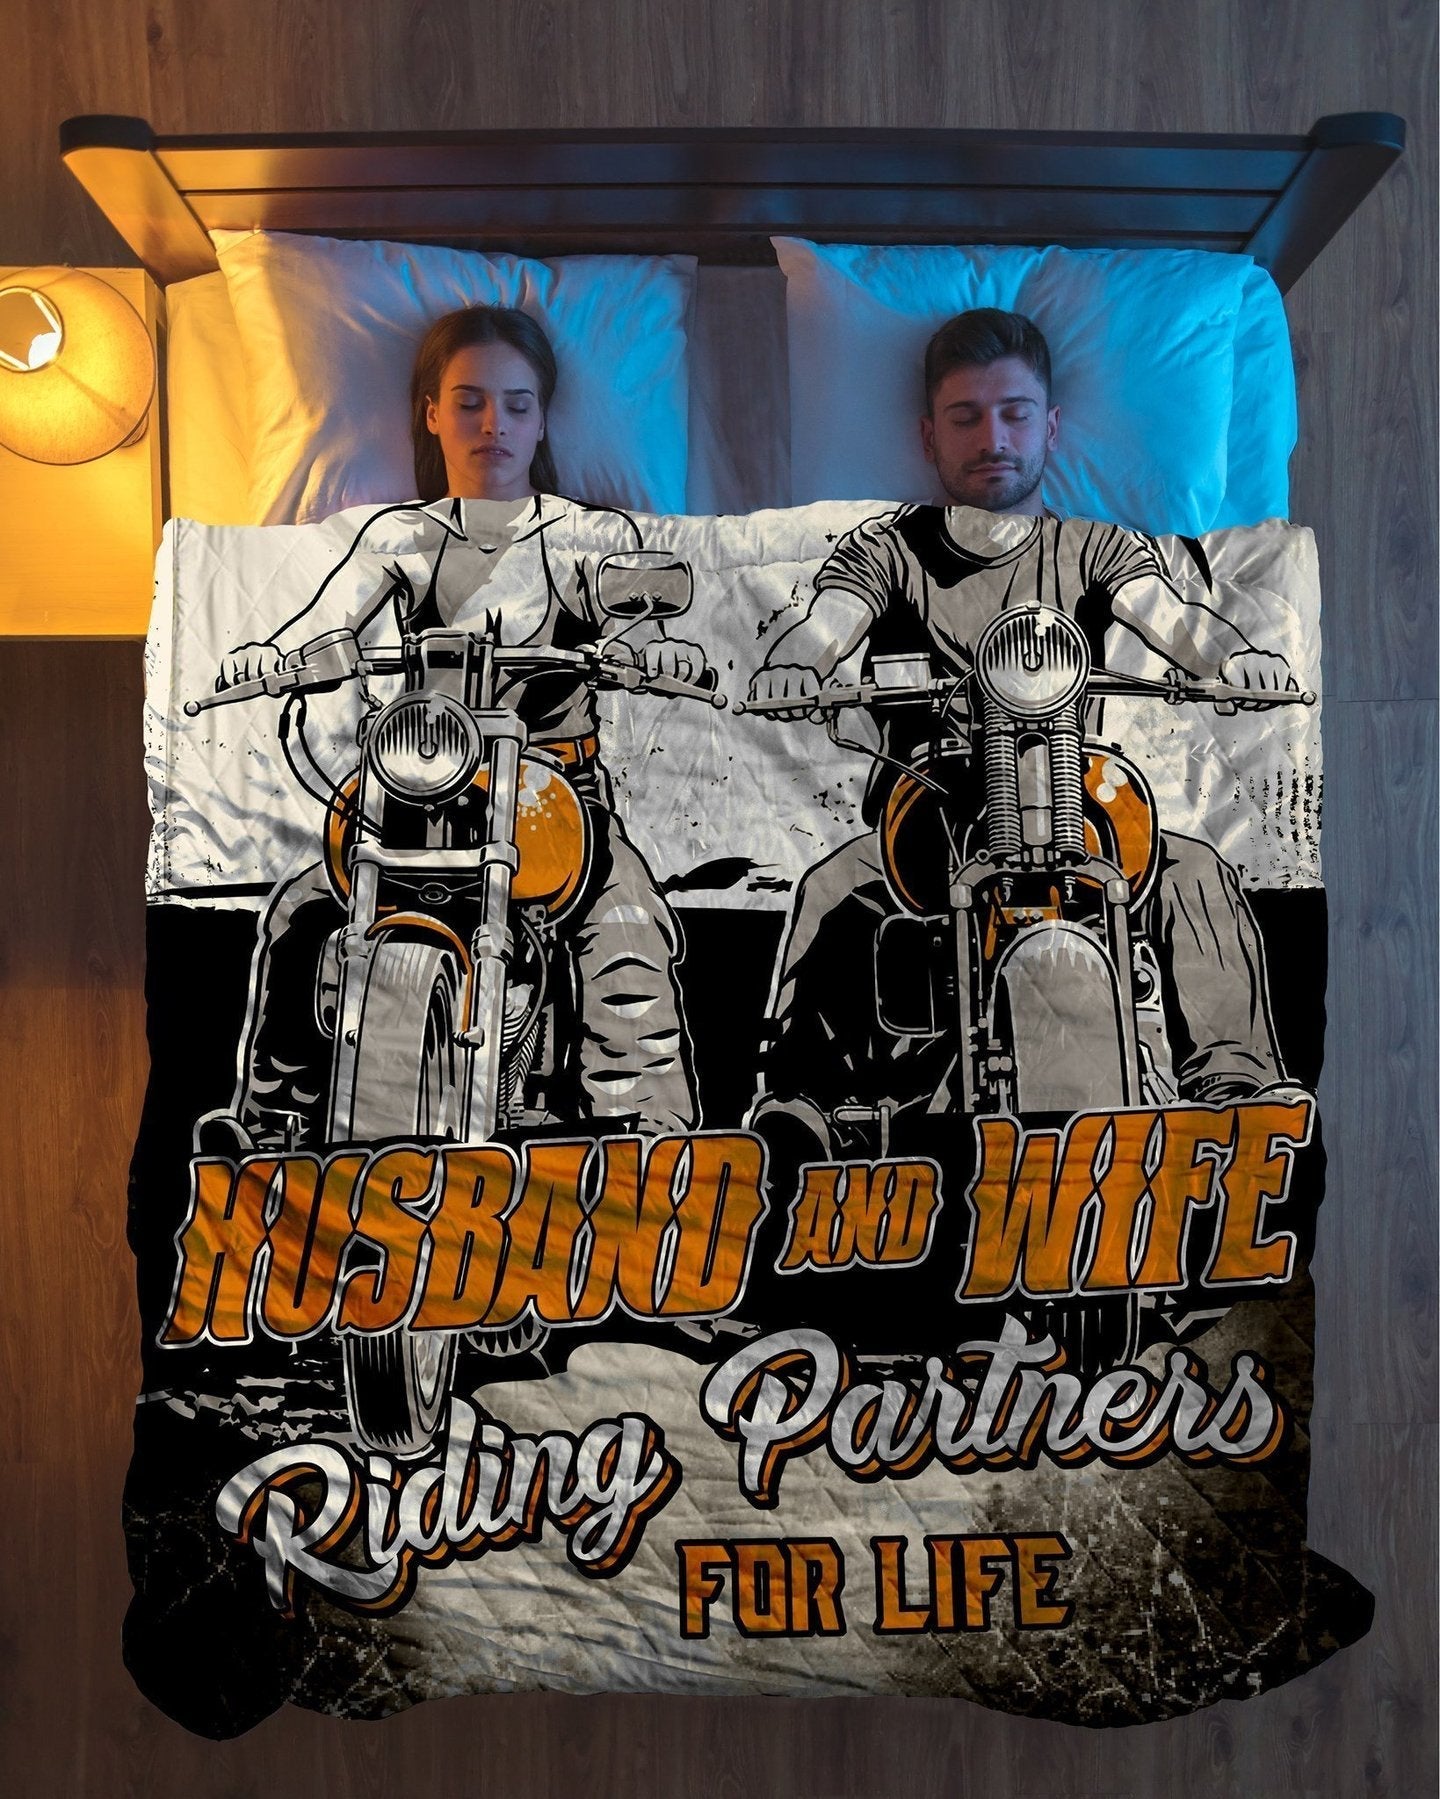 Blanketify HUSBAND AND WIFE RIDING PARTNERS FOR LIFE BLANKET Gift For Wife Husband Couple Valentine's Day Birthday Gift Home Decor Bedding Couch Sofa Soft and Comfy Cozy